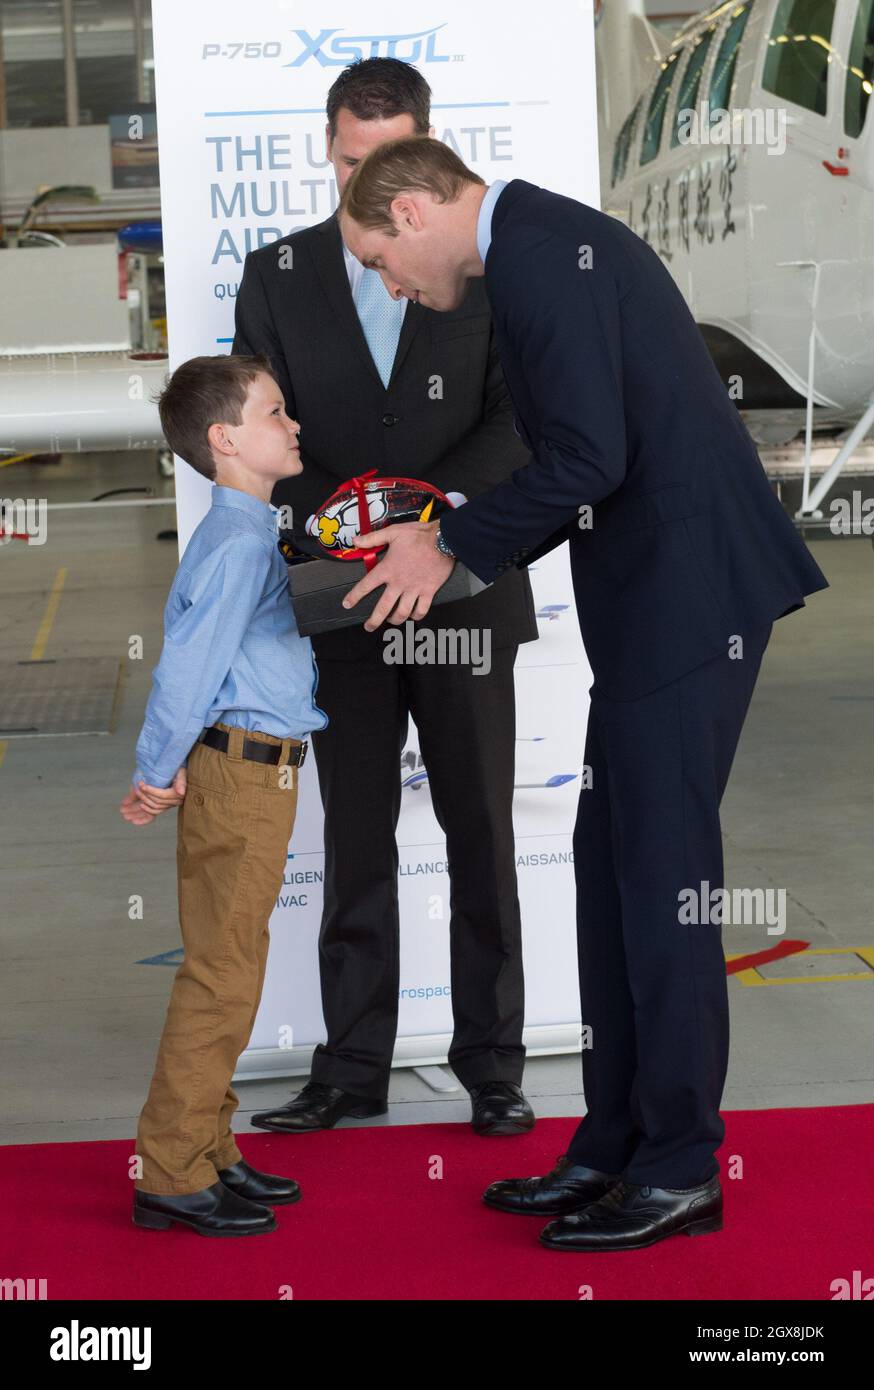 Prince William, Duke of Cambridge receives a gift from a boy during a visit to Pacific Aerospace in Hamilton, New Zealand Stock Photo